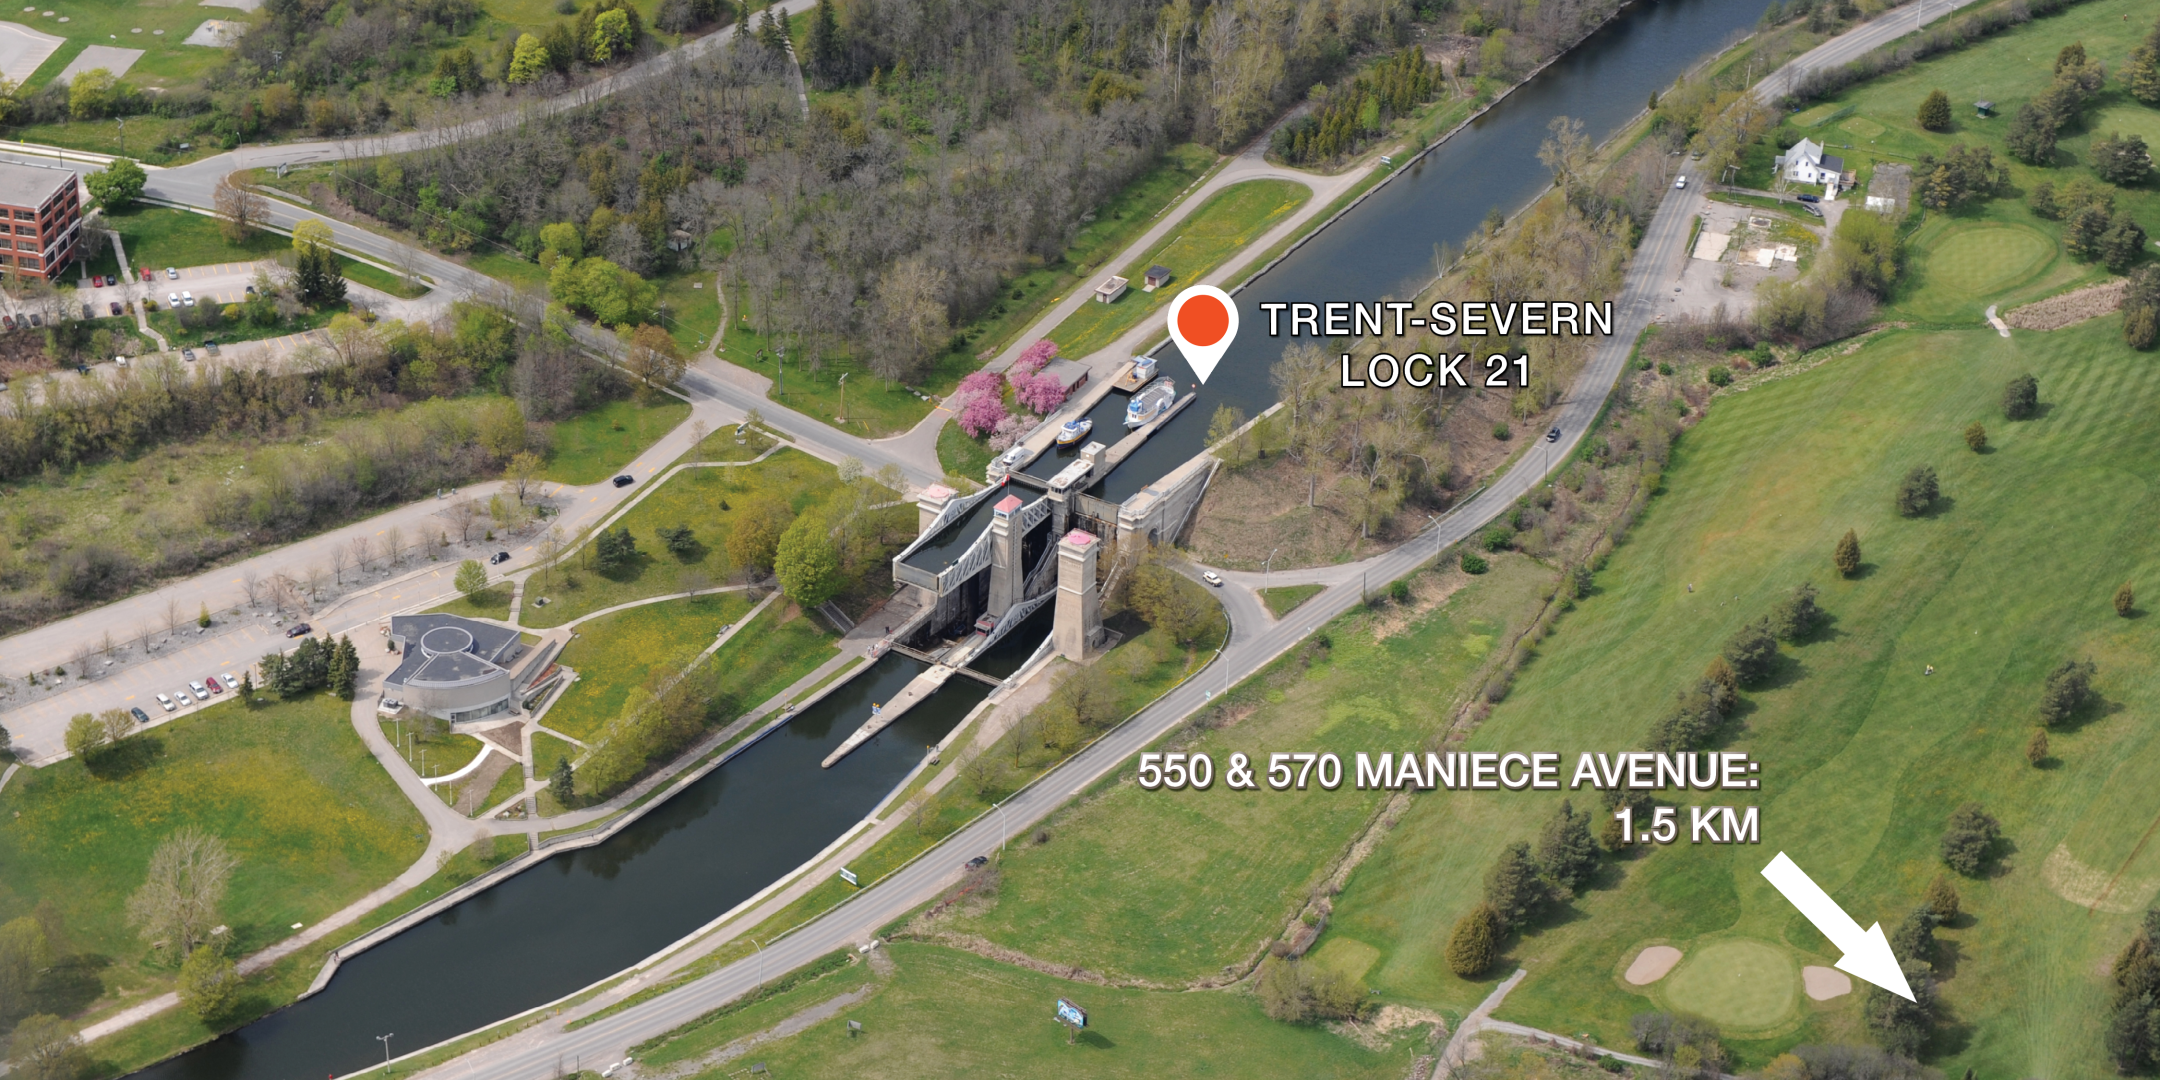 Welland Canal Lift Lock with close proximity to subject property